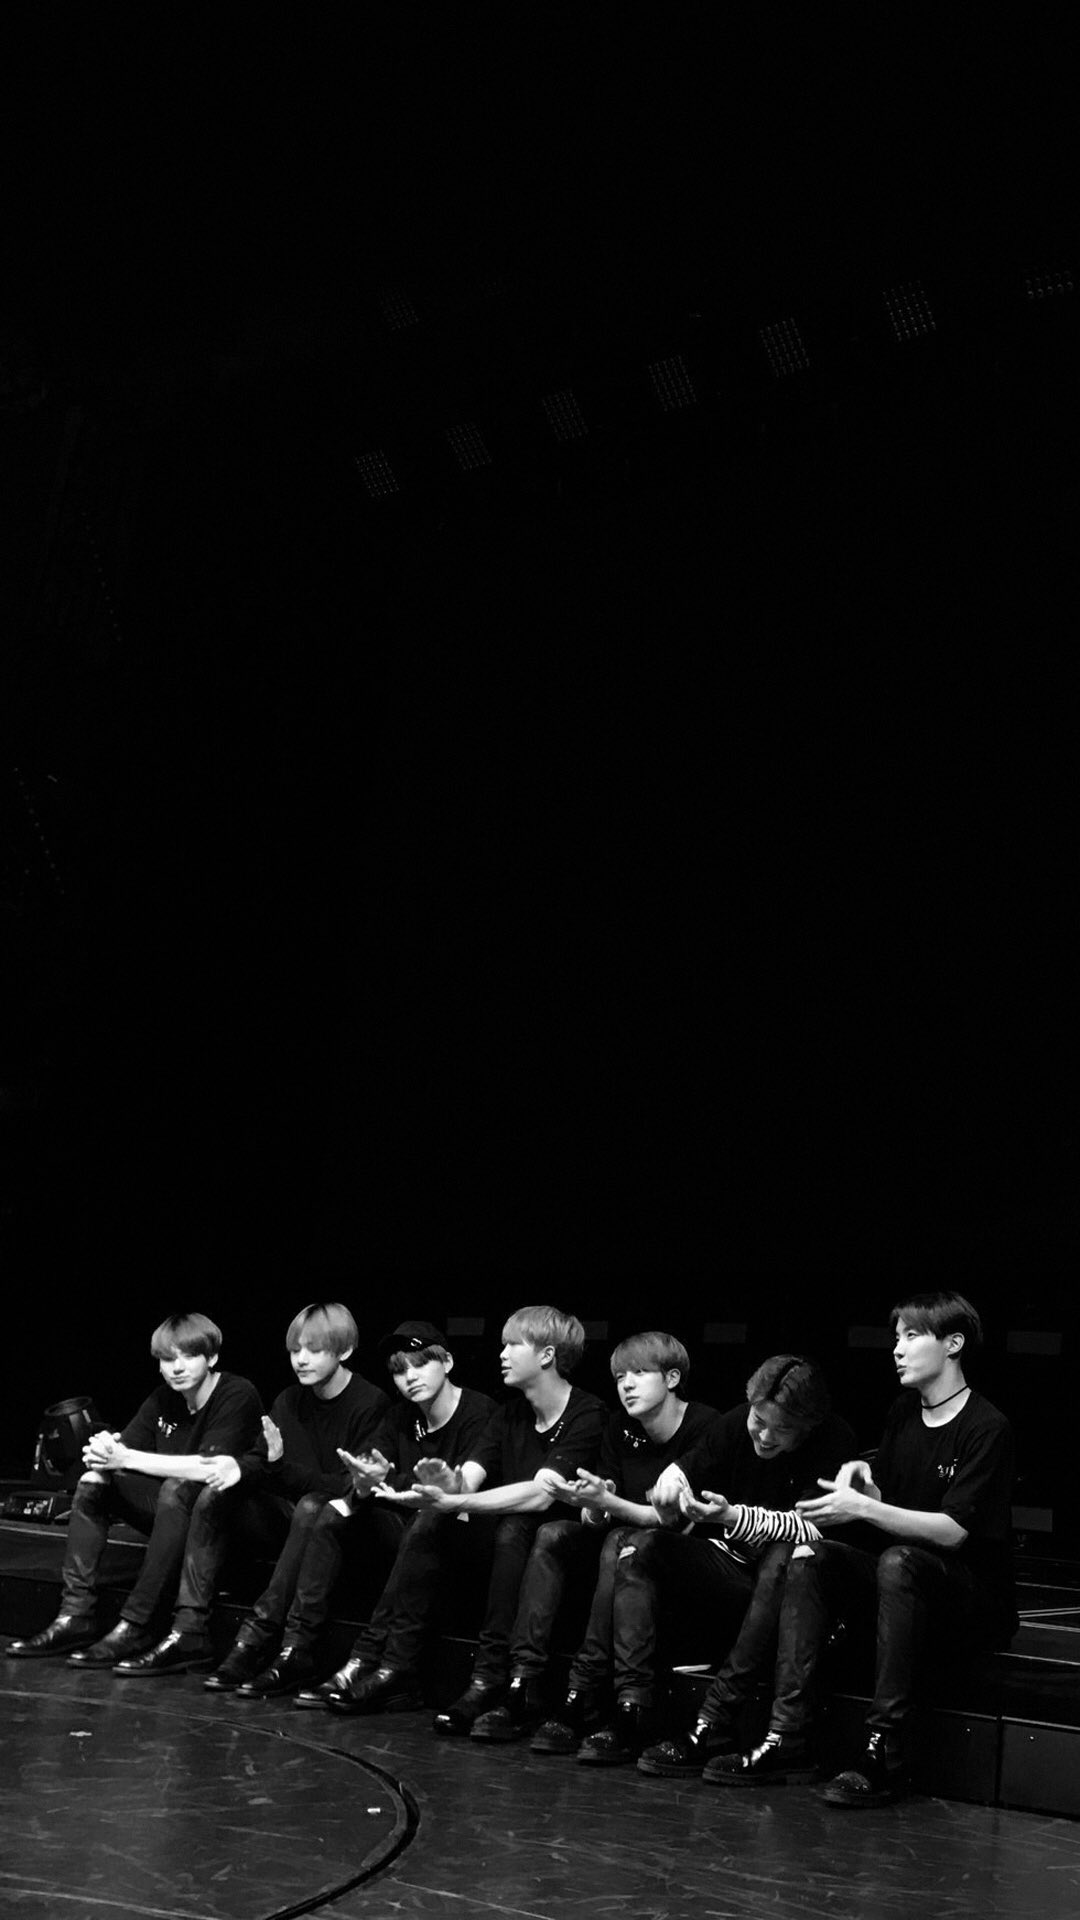 Bts Wallpaper Hd Black And White - Recent wallpapers by our community.